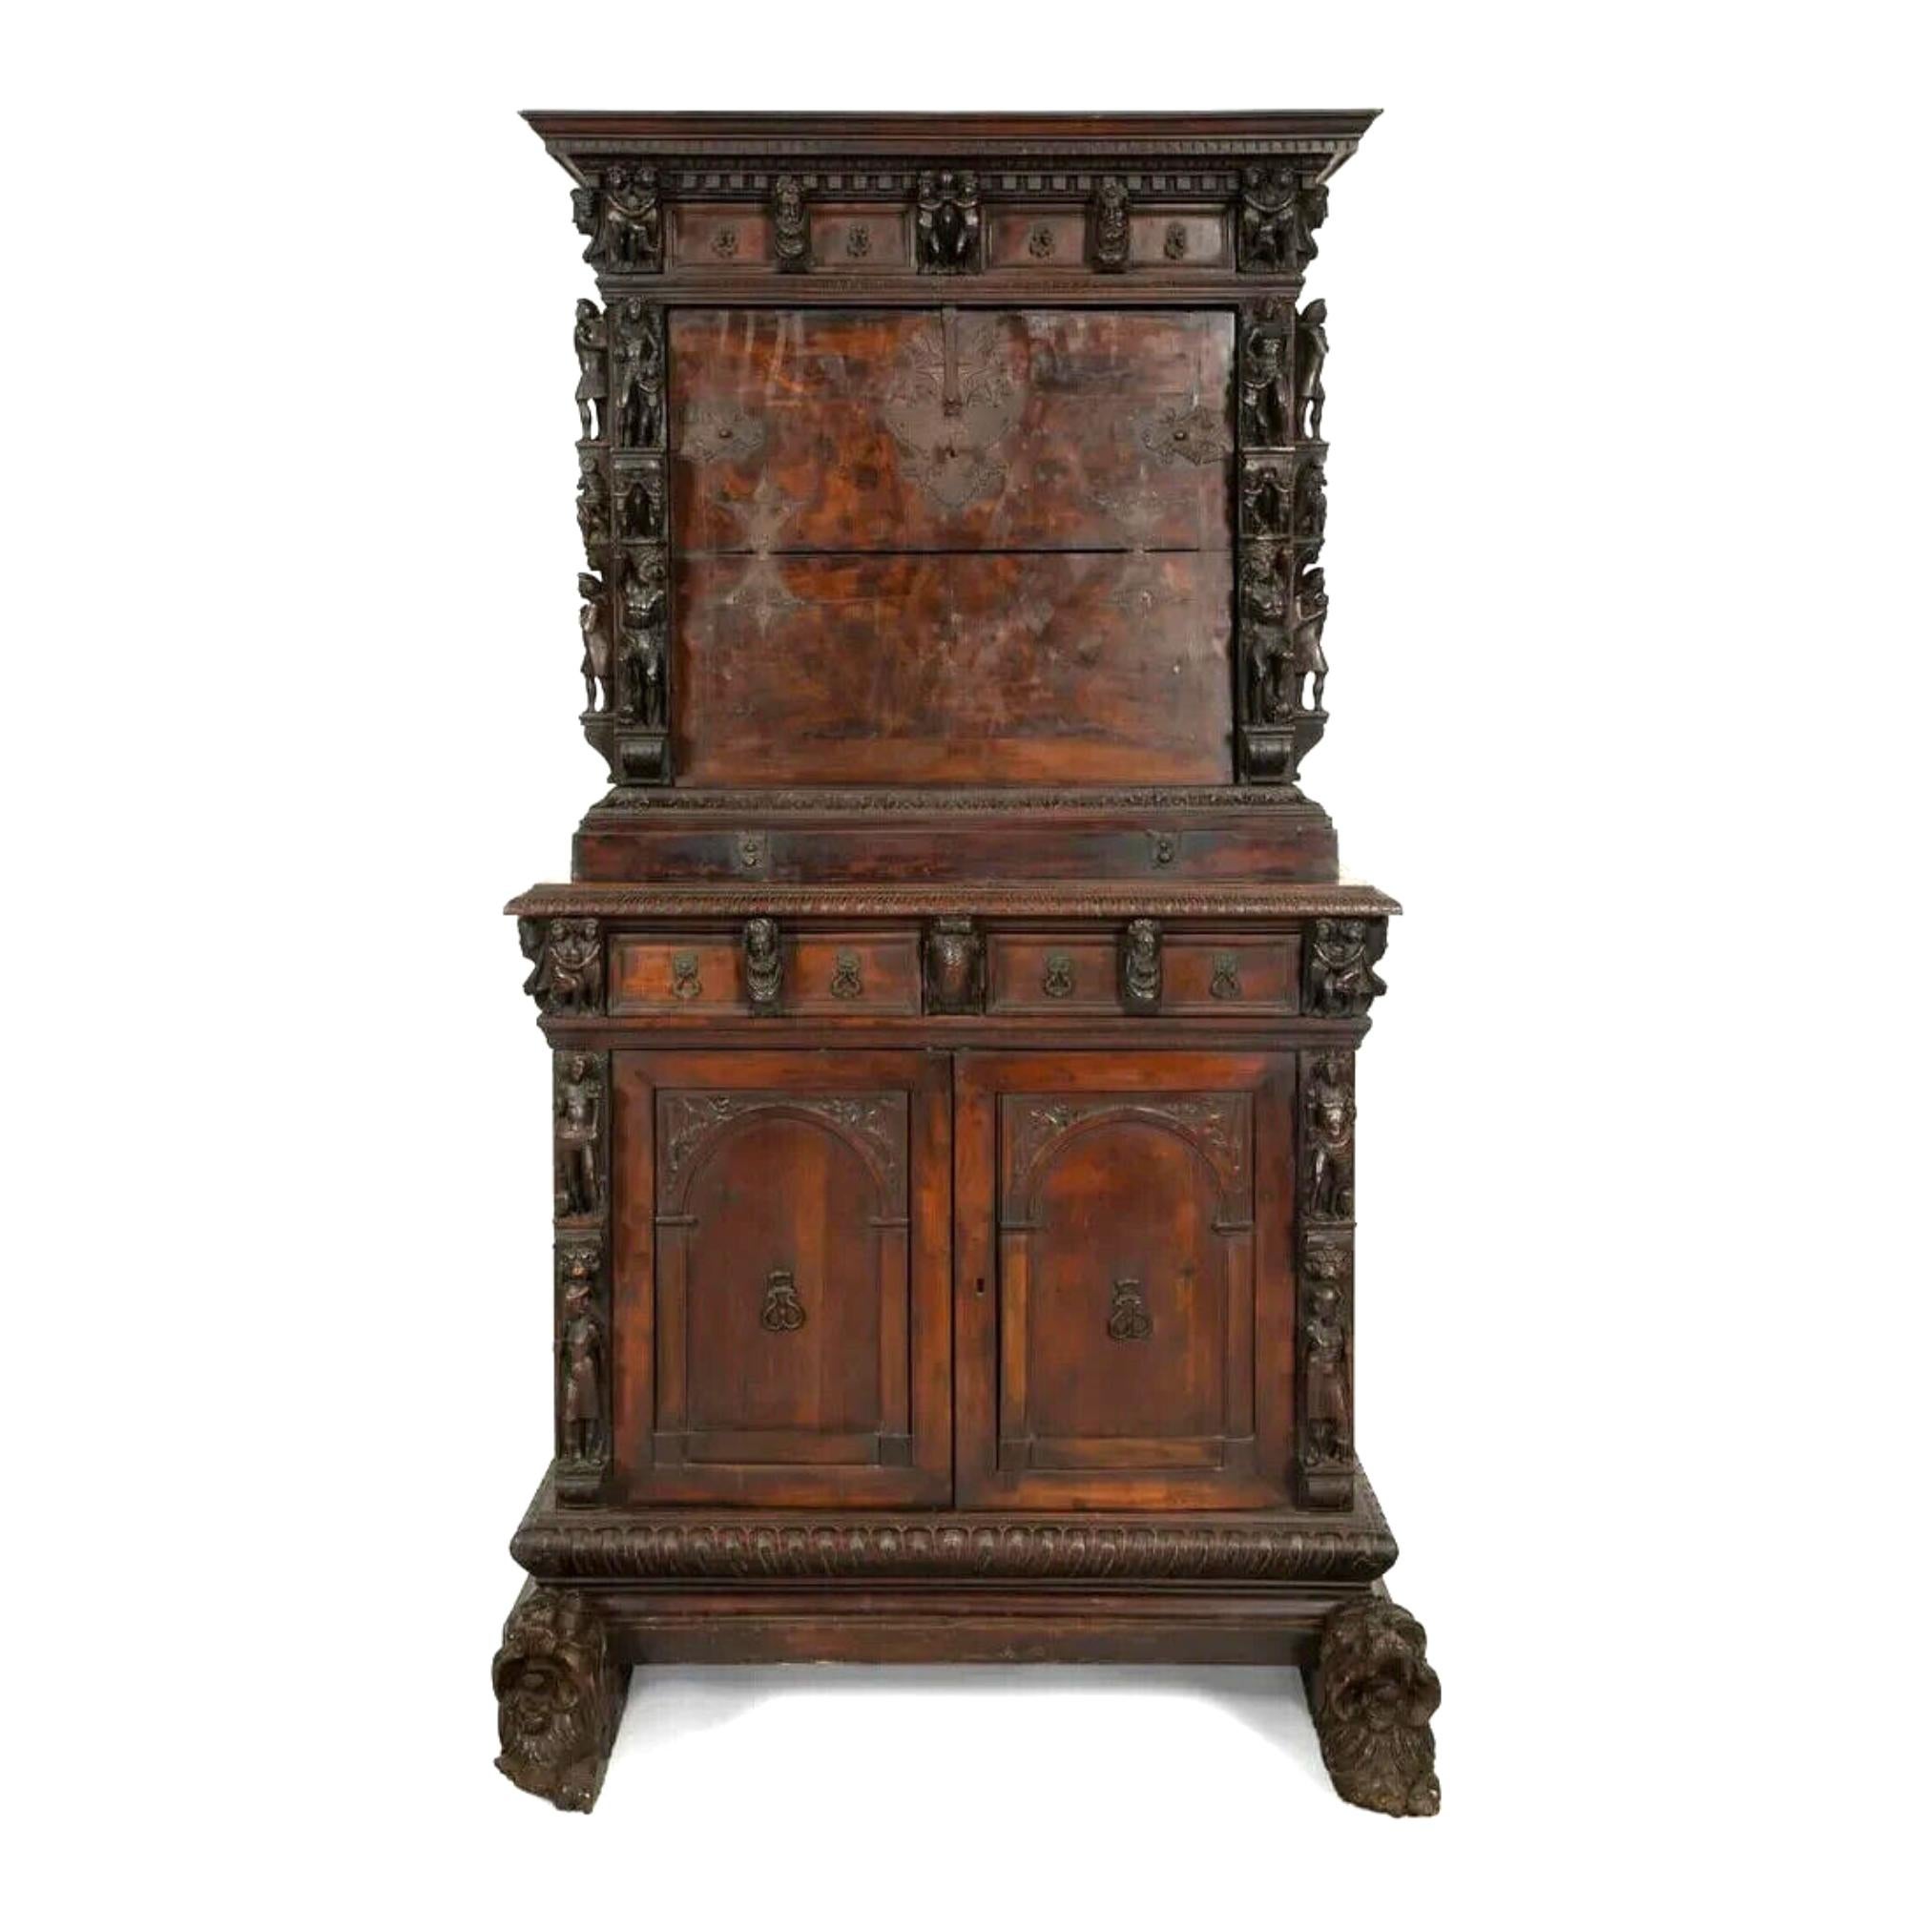 Stunning 17-1800s Antique Continental Baroque Walnut, Carved, Bambochi Style Cabinet!!

Antque iCabinet, Bambochi Style, Continental Baroque Walnut, 18th / 19th C, 17-1800's!  

This is an antique cabinet made in Italy during the 18th or 19th